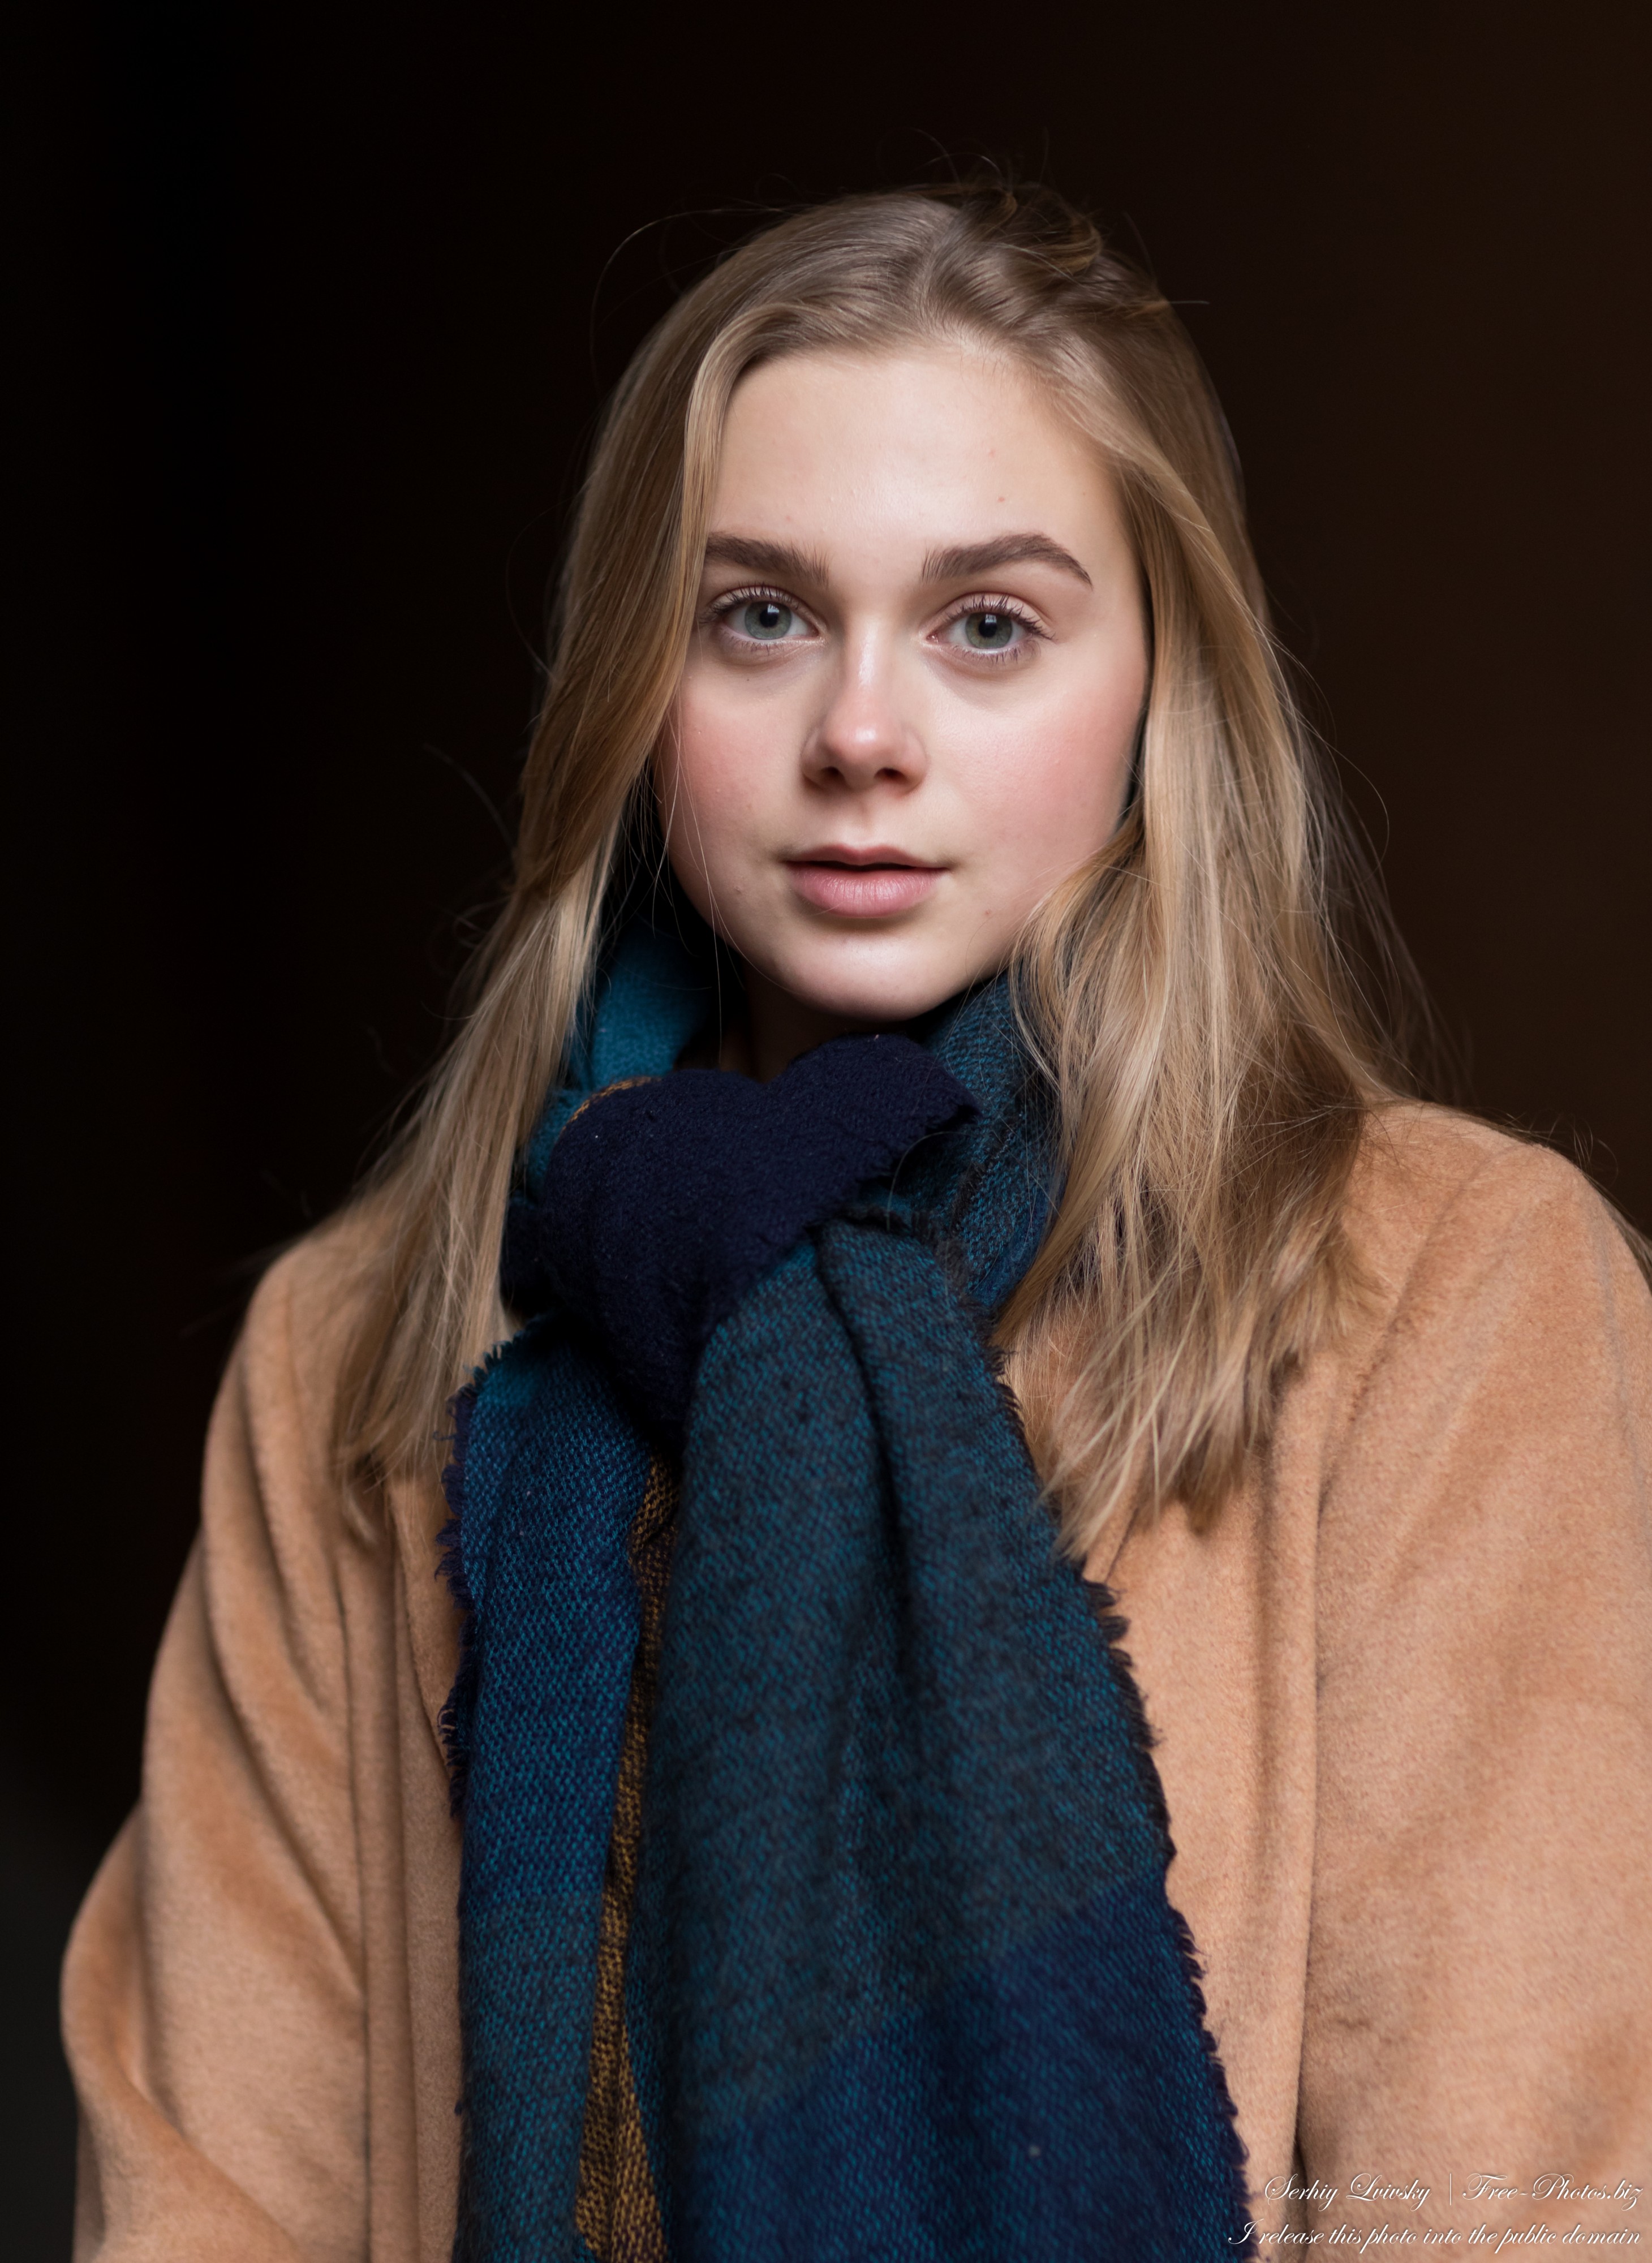 Emilia - a 15-year-old natural blonde Catholic girl photographed in November 2020 by Serhiy Lvivsky, picture 24